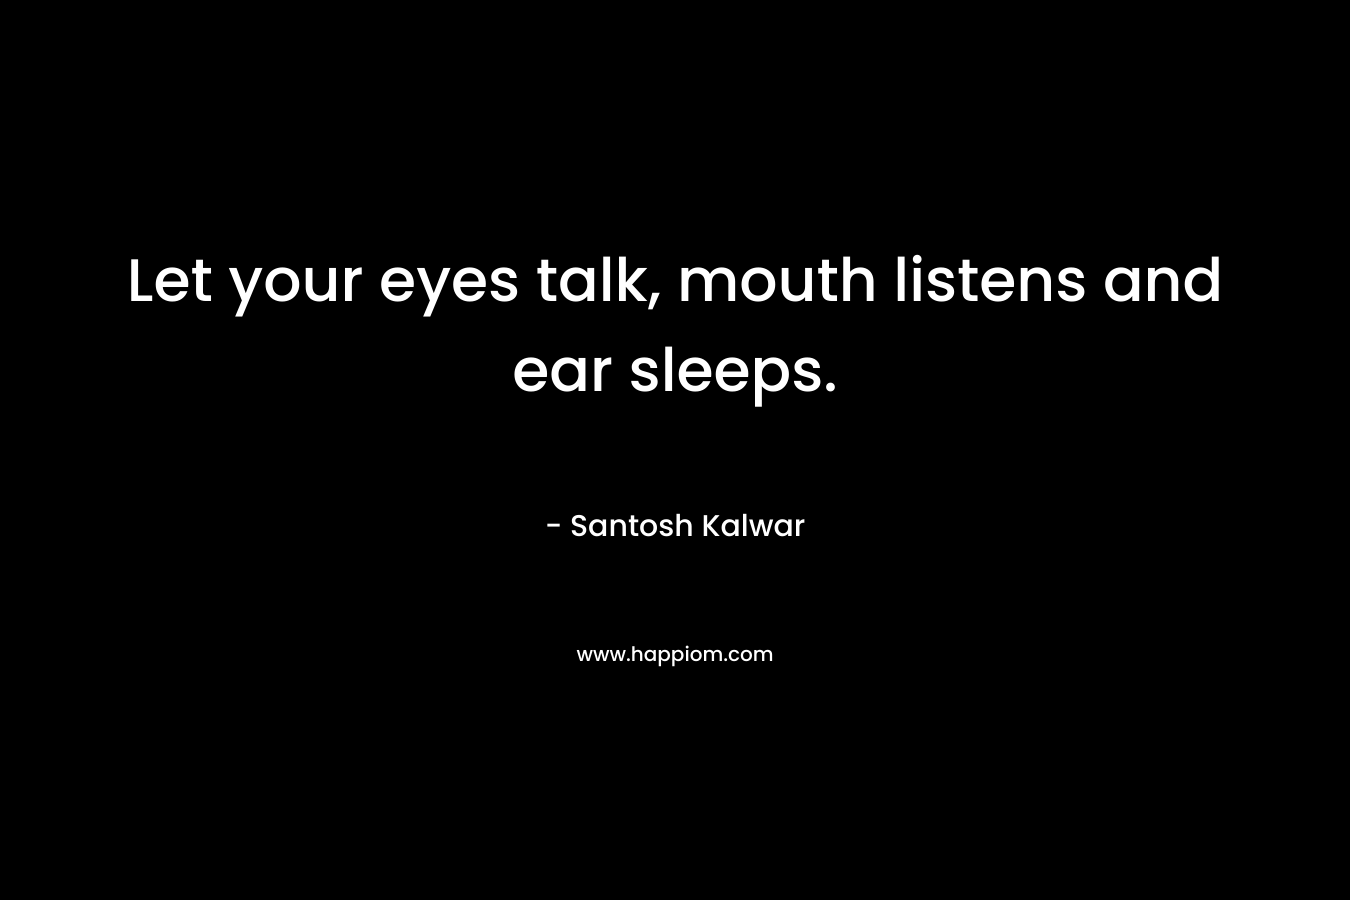 Let your eyes talk, mouth listens and ear sleeps.